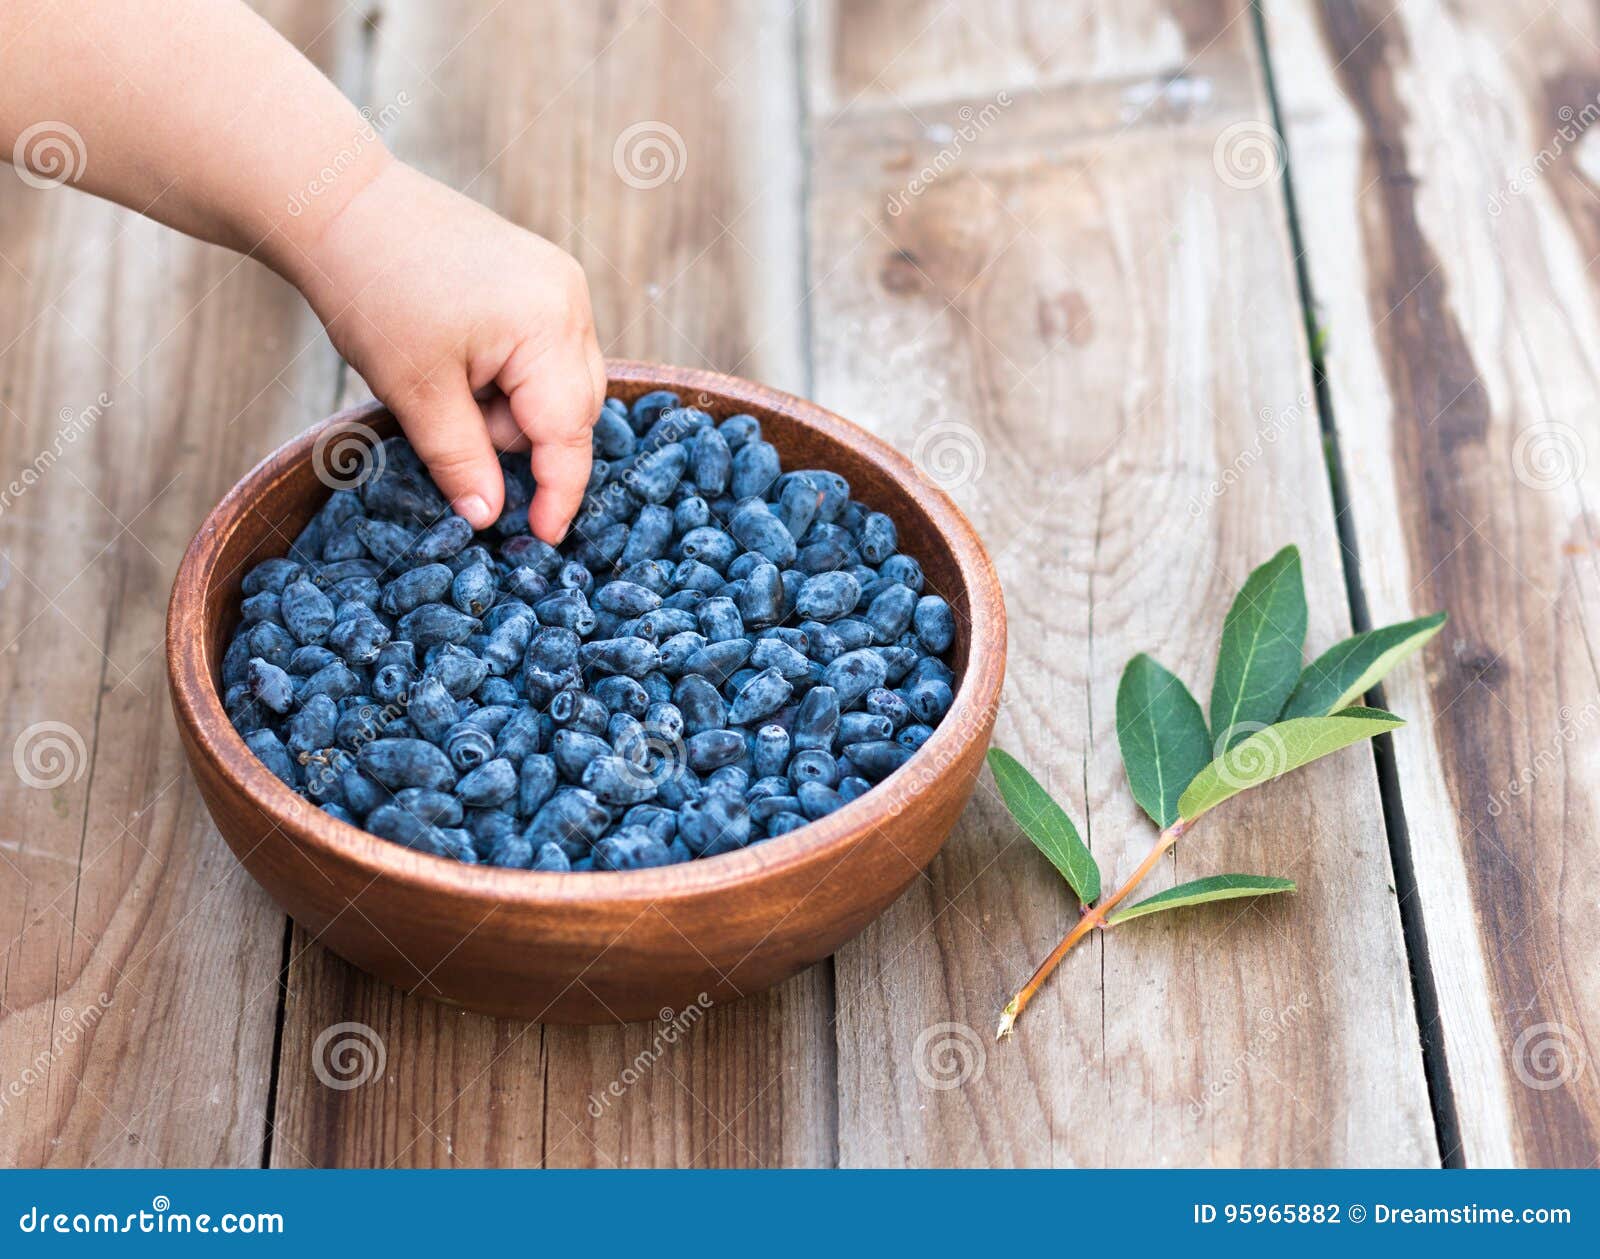 child eating blue berries